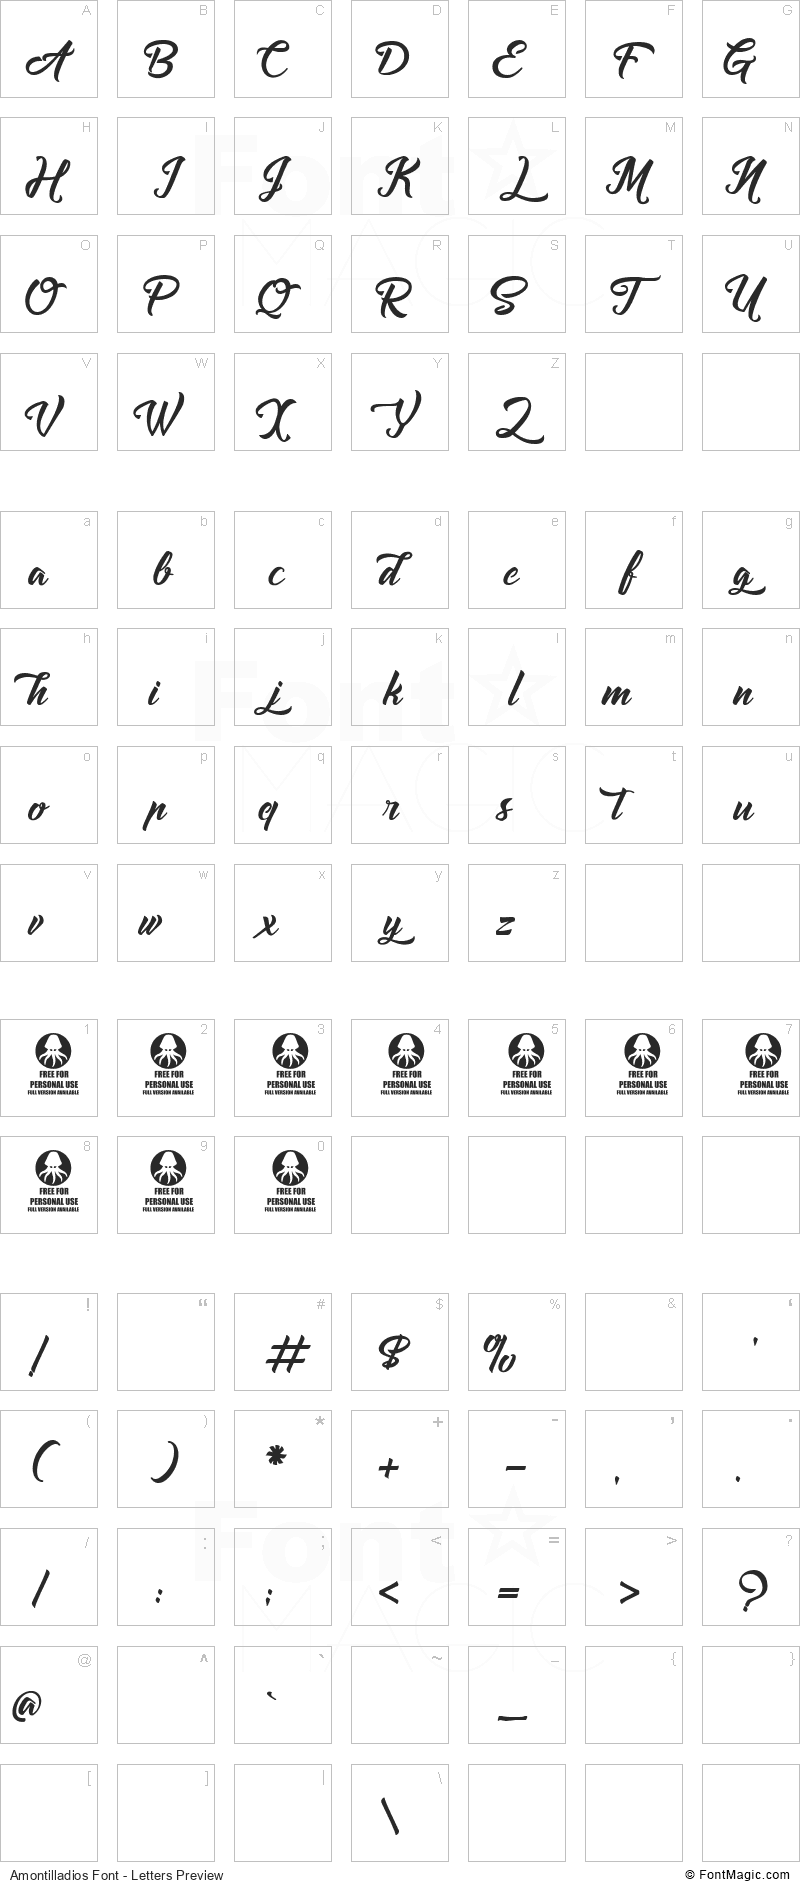 Amontilladios Font - All Latters Preview Chart